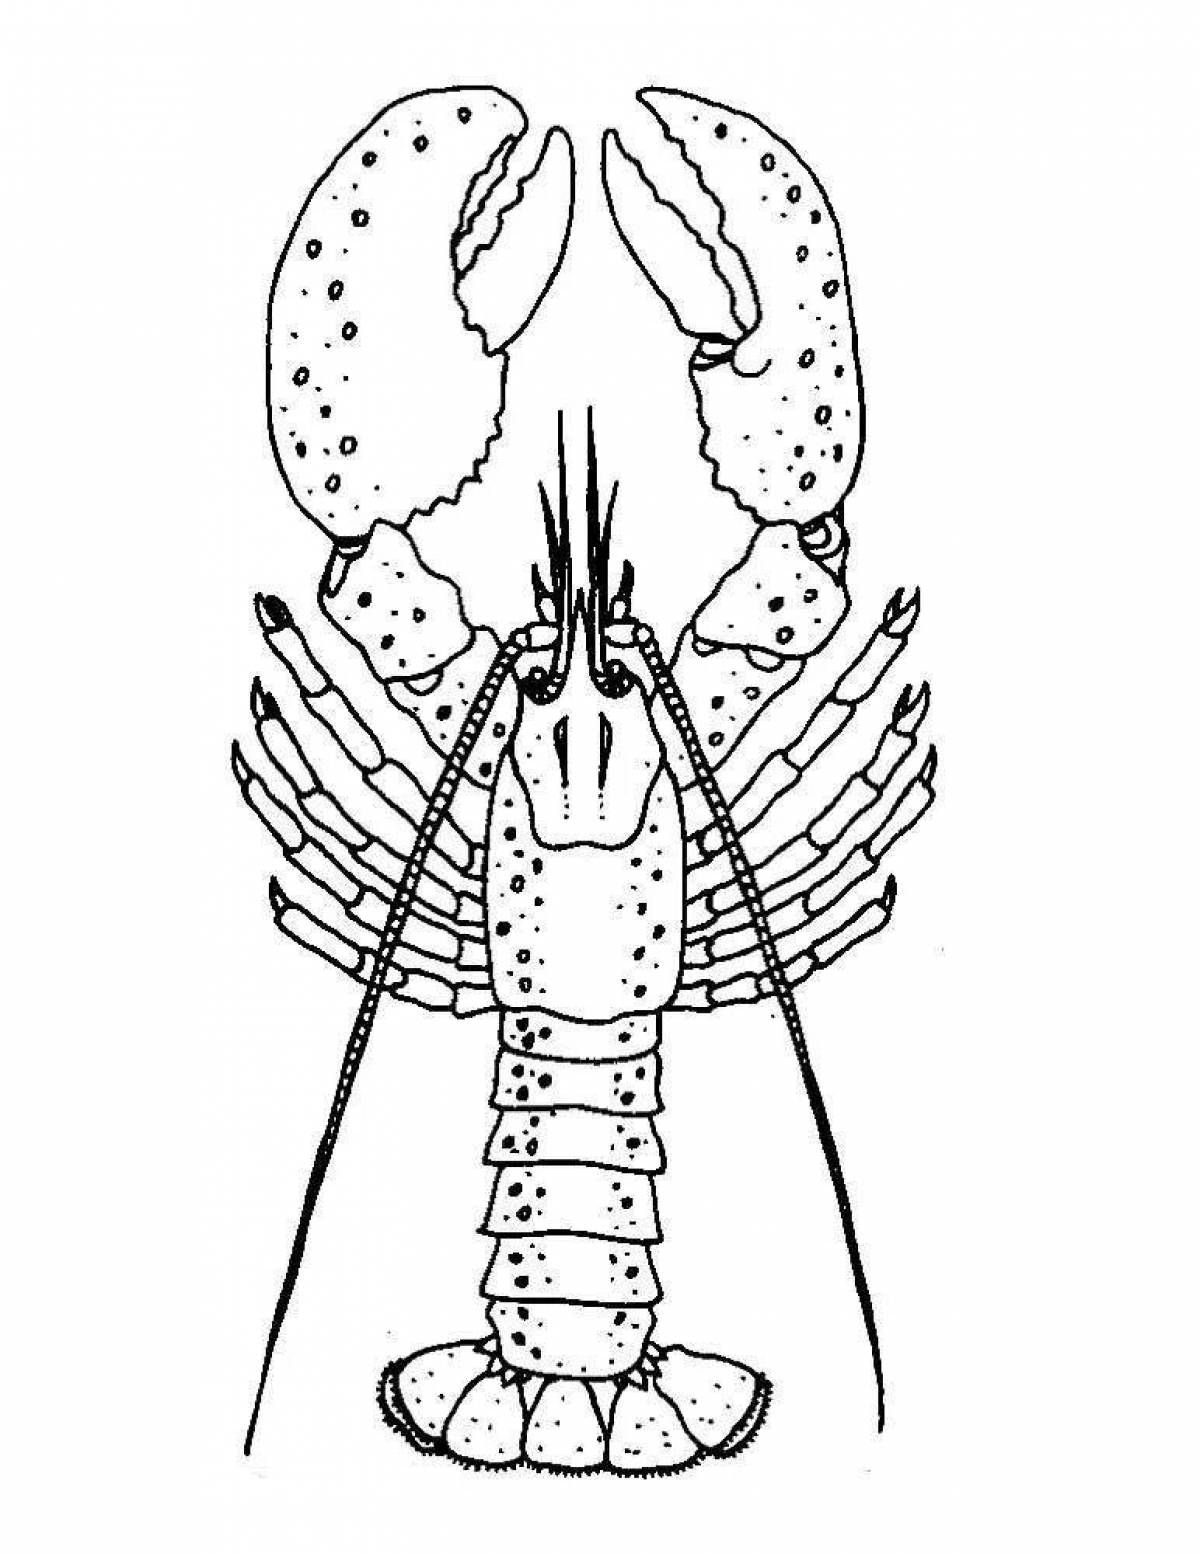 Animated lobster coloring page